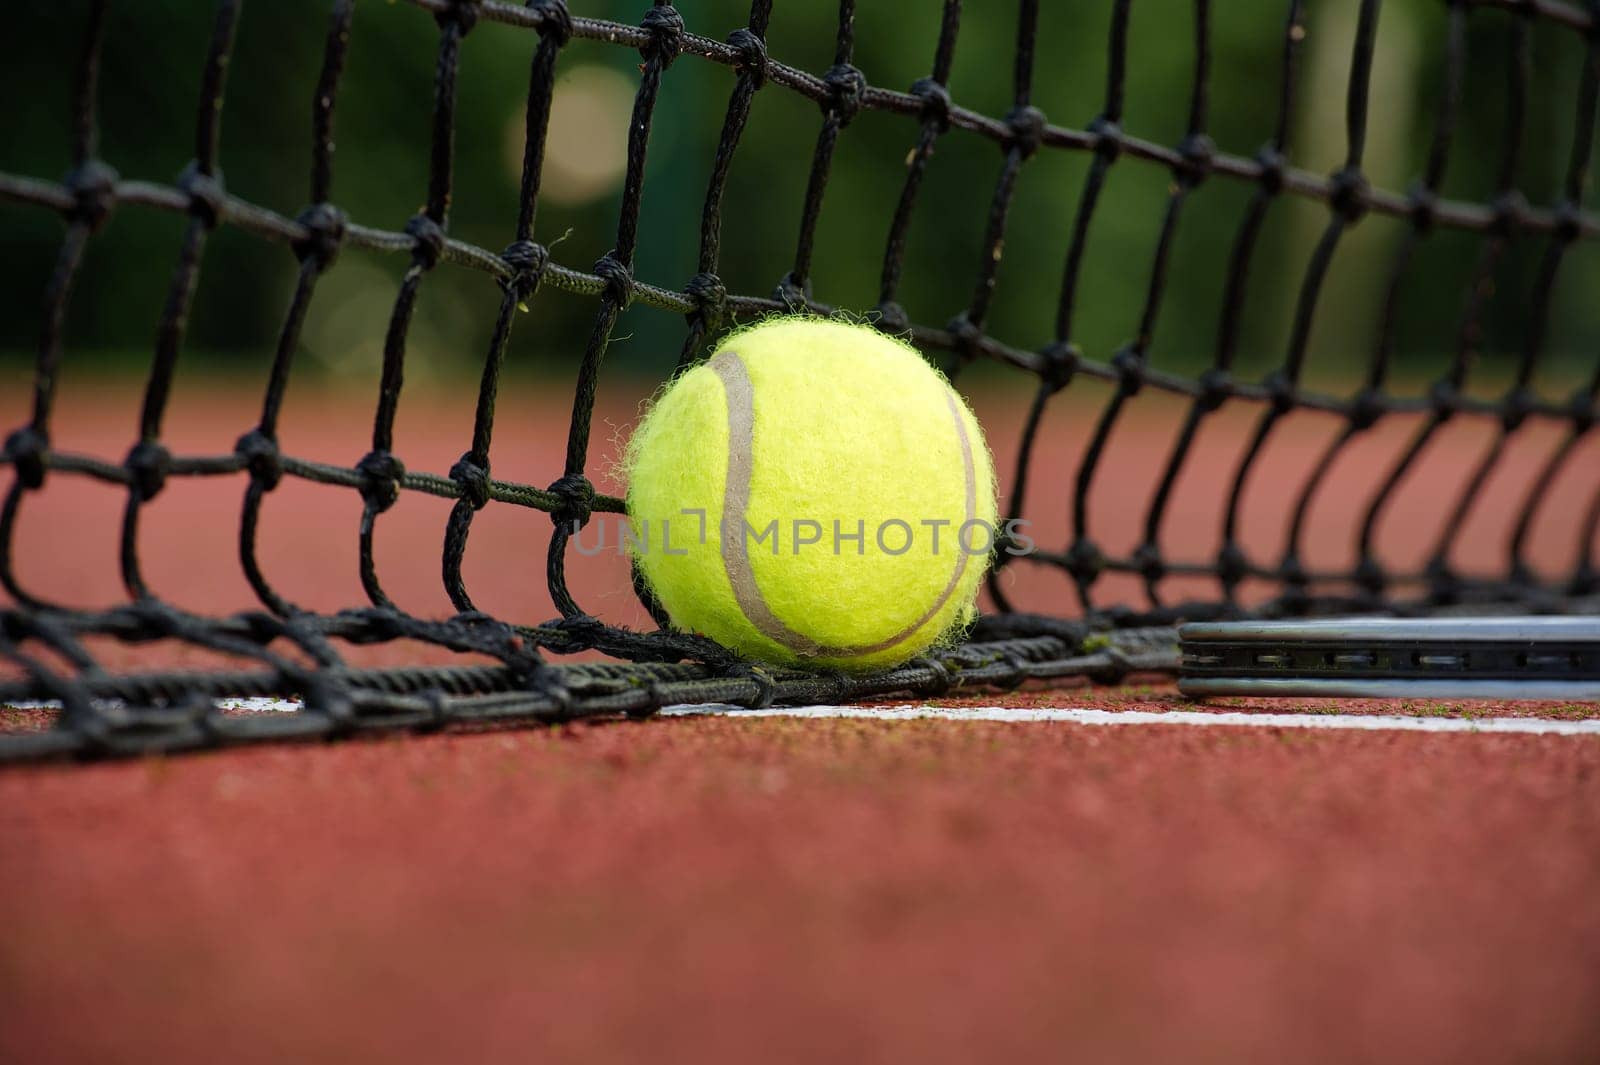 Tennis scene with black net, ball on white line in low angle view